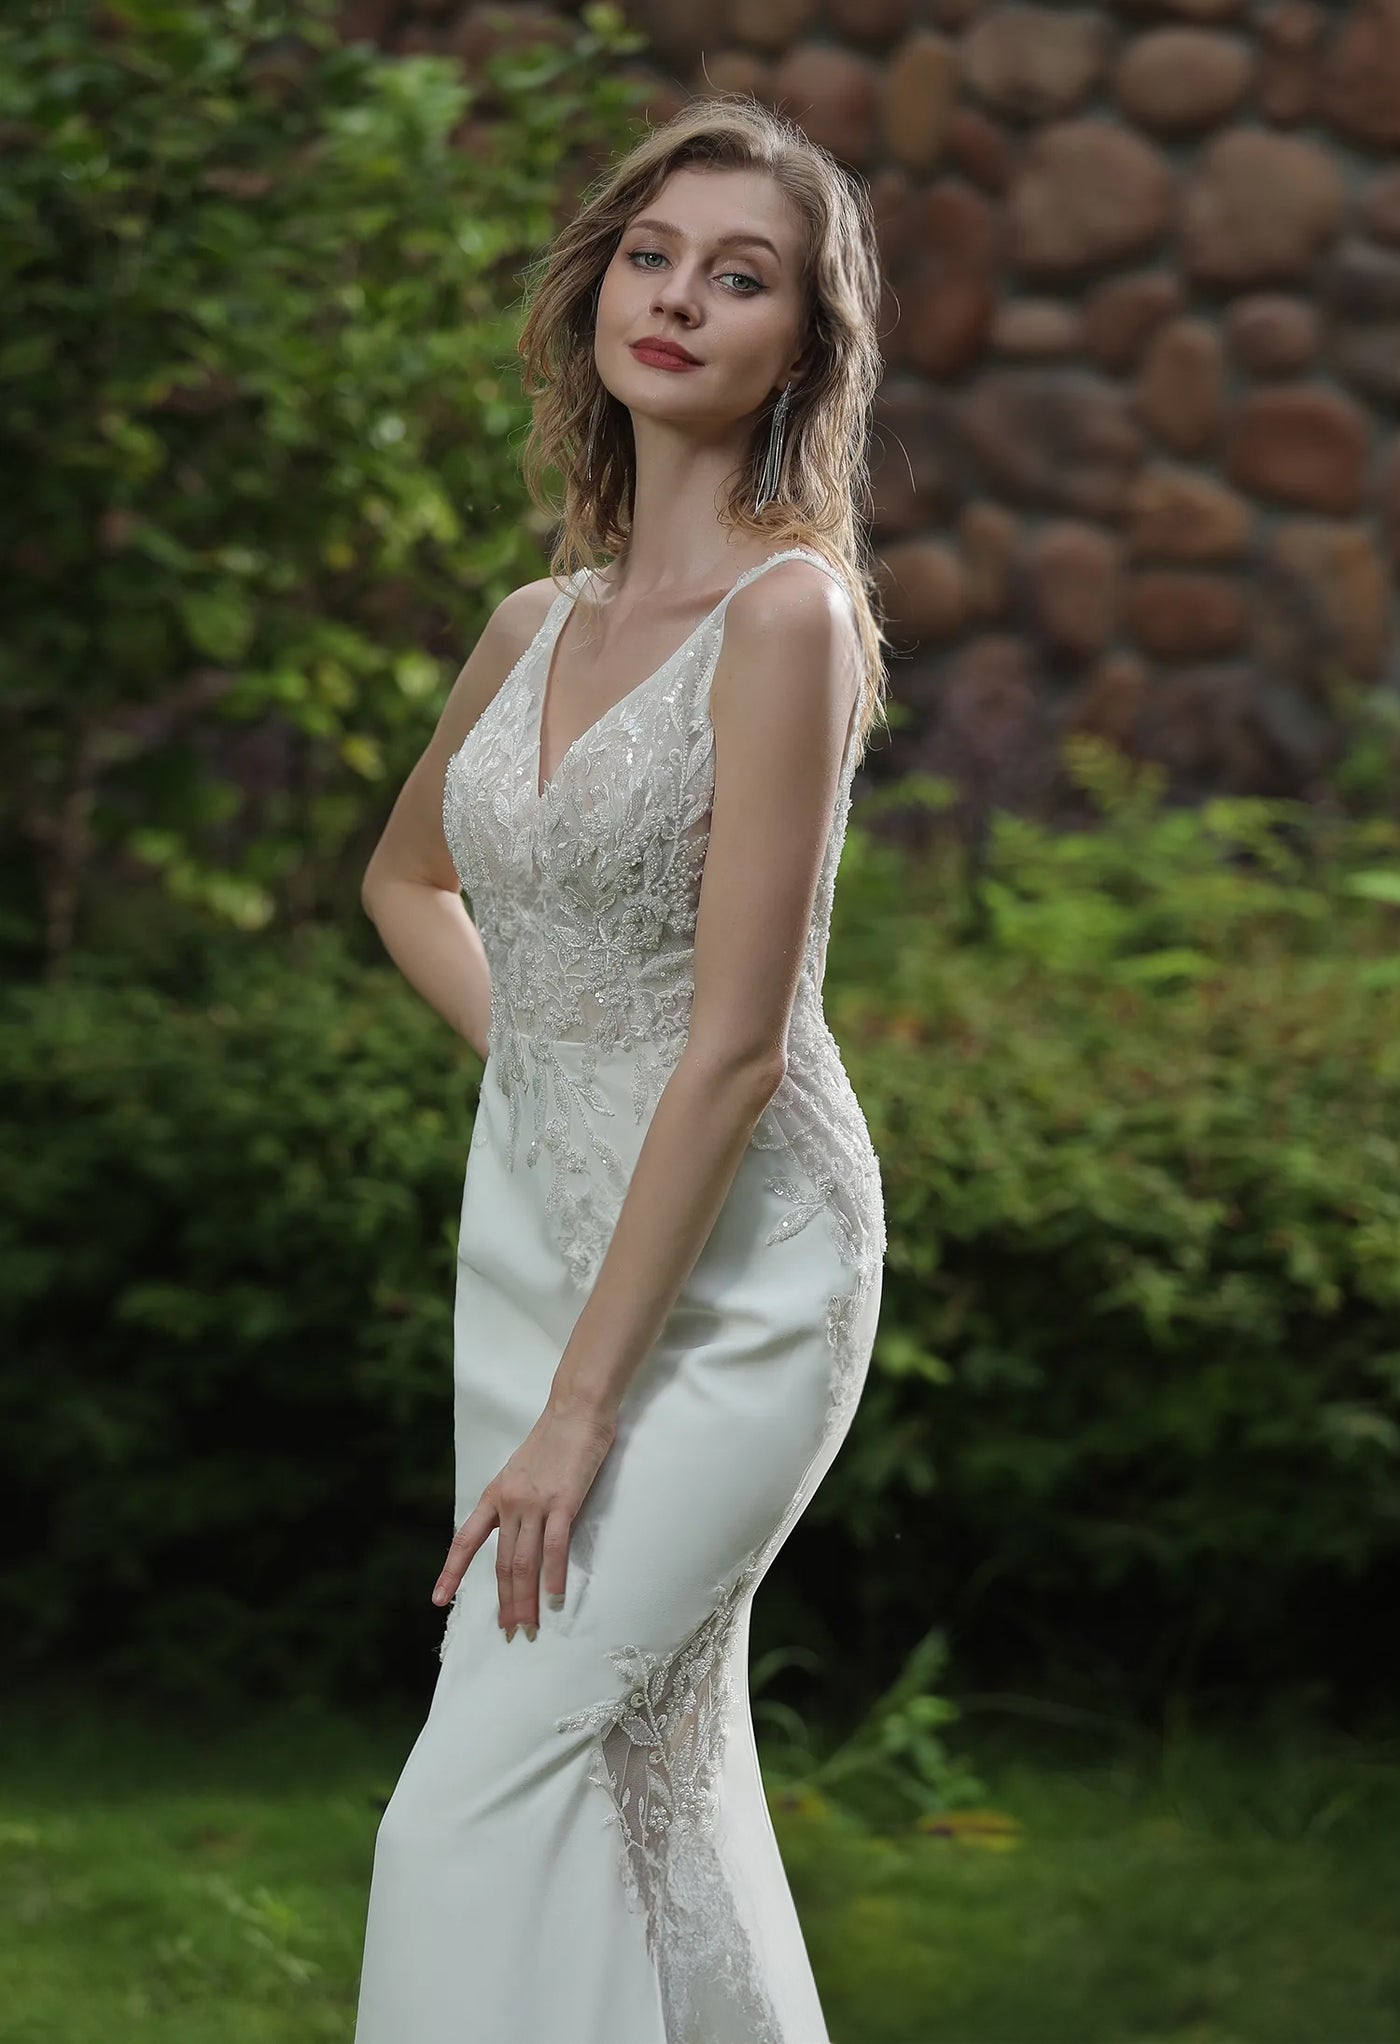 A woman in a Bergamot Bridal Simple Beaded Fit And Flare Gown with V Neckline And Crepe Skirt, adorned with beaded lace, posing outdoors with a natural background.